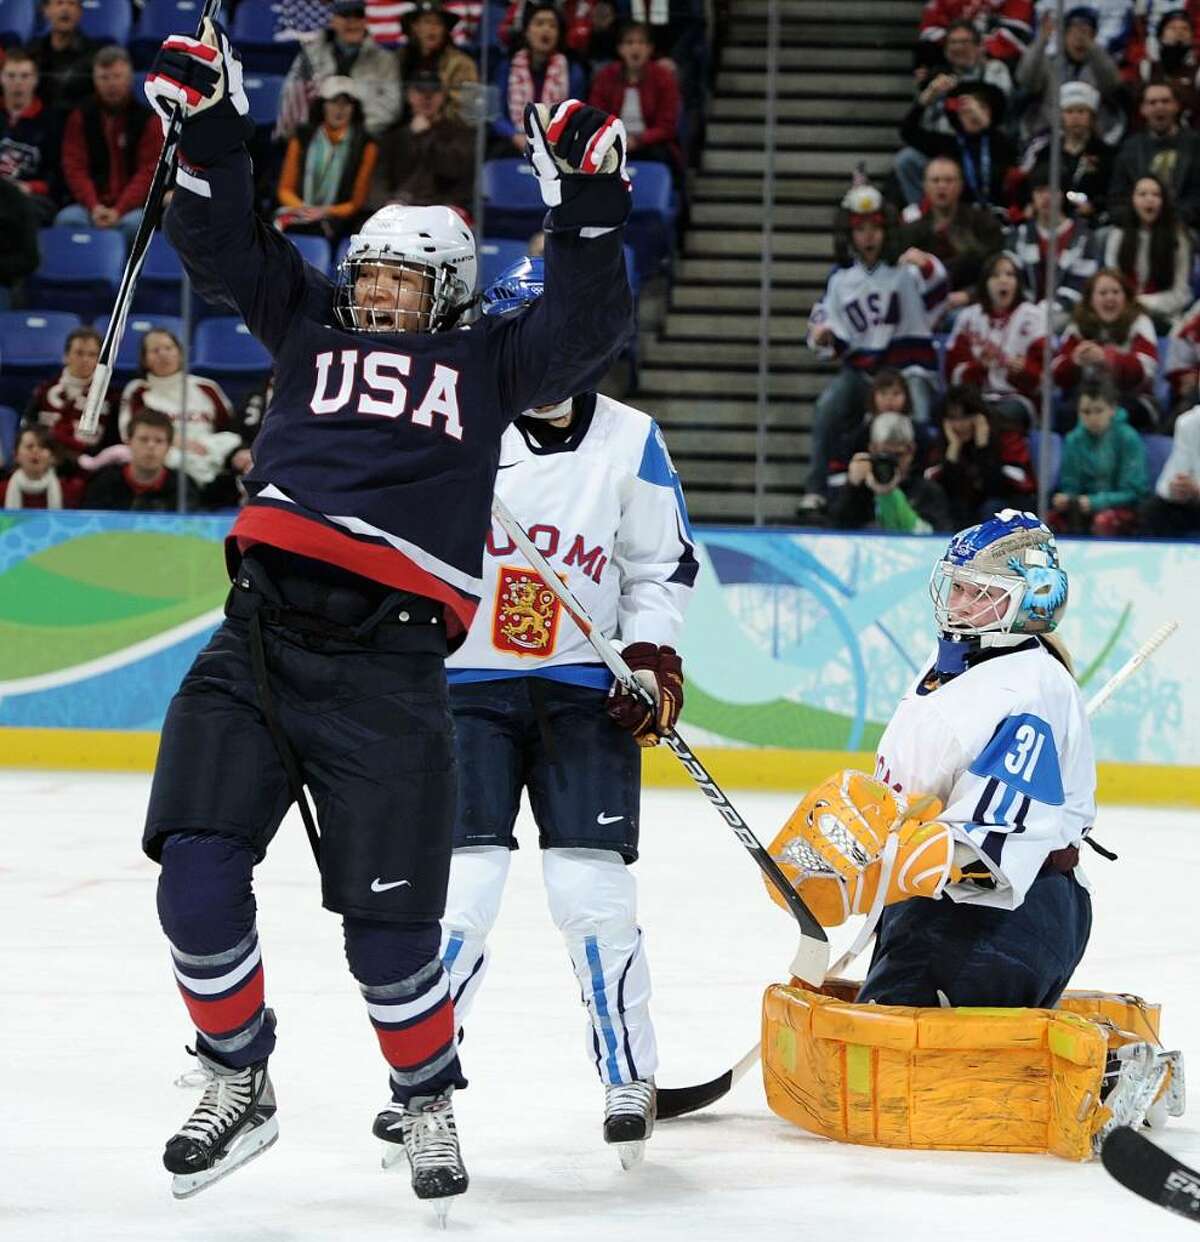 VANCOUVER, BC - FEBRUARY 18: Julie Chu of The United States celebrates scoring their first goal during the ice hockey women's preliminary game between USA and Finland on day 7 of the 2010 Vancouver Winter Olympics at UBC Thunderbird Arena on February 18, 2010 in Vancouver, Canada. (Photo by Harry How/Getty Images) *** Local Caption *** Julie Chu